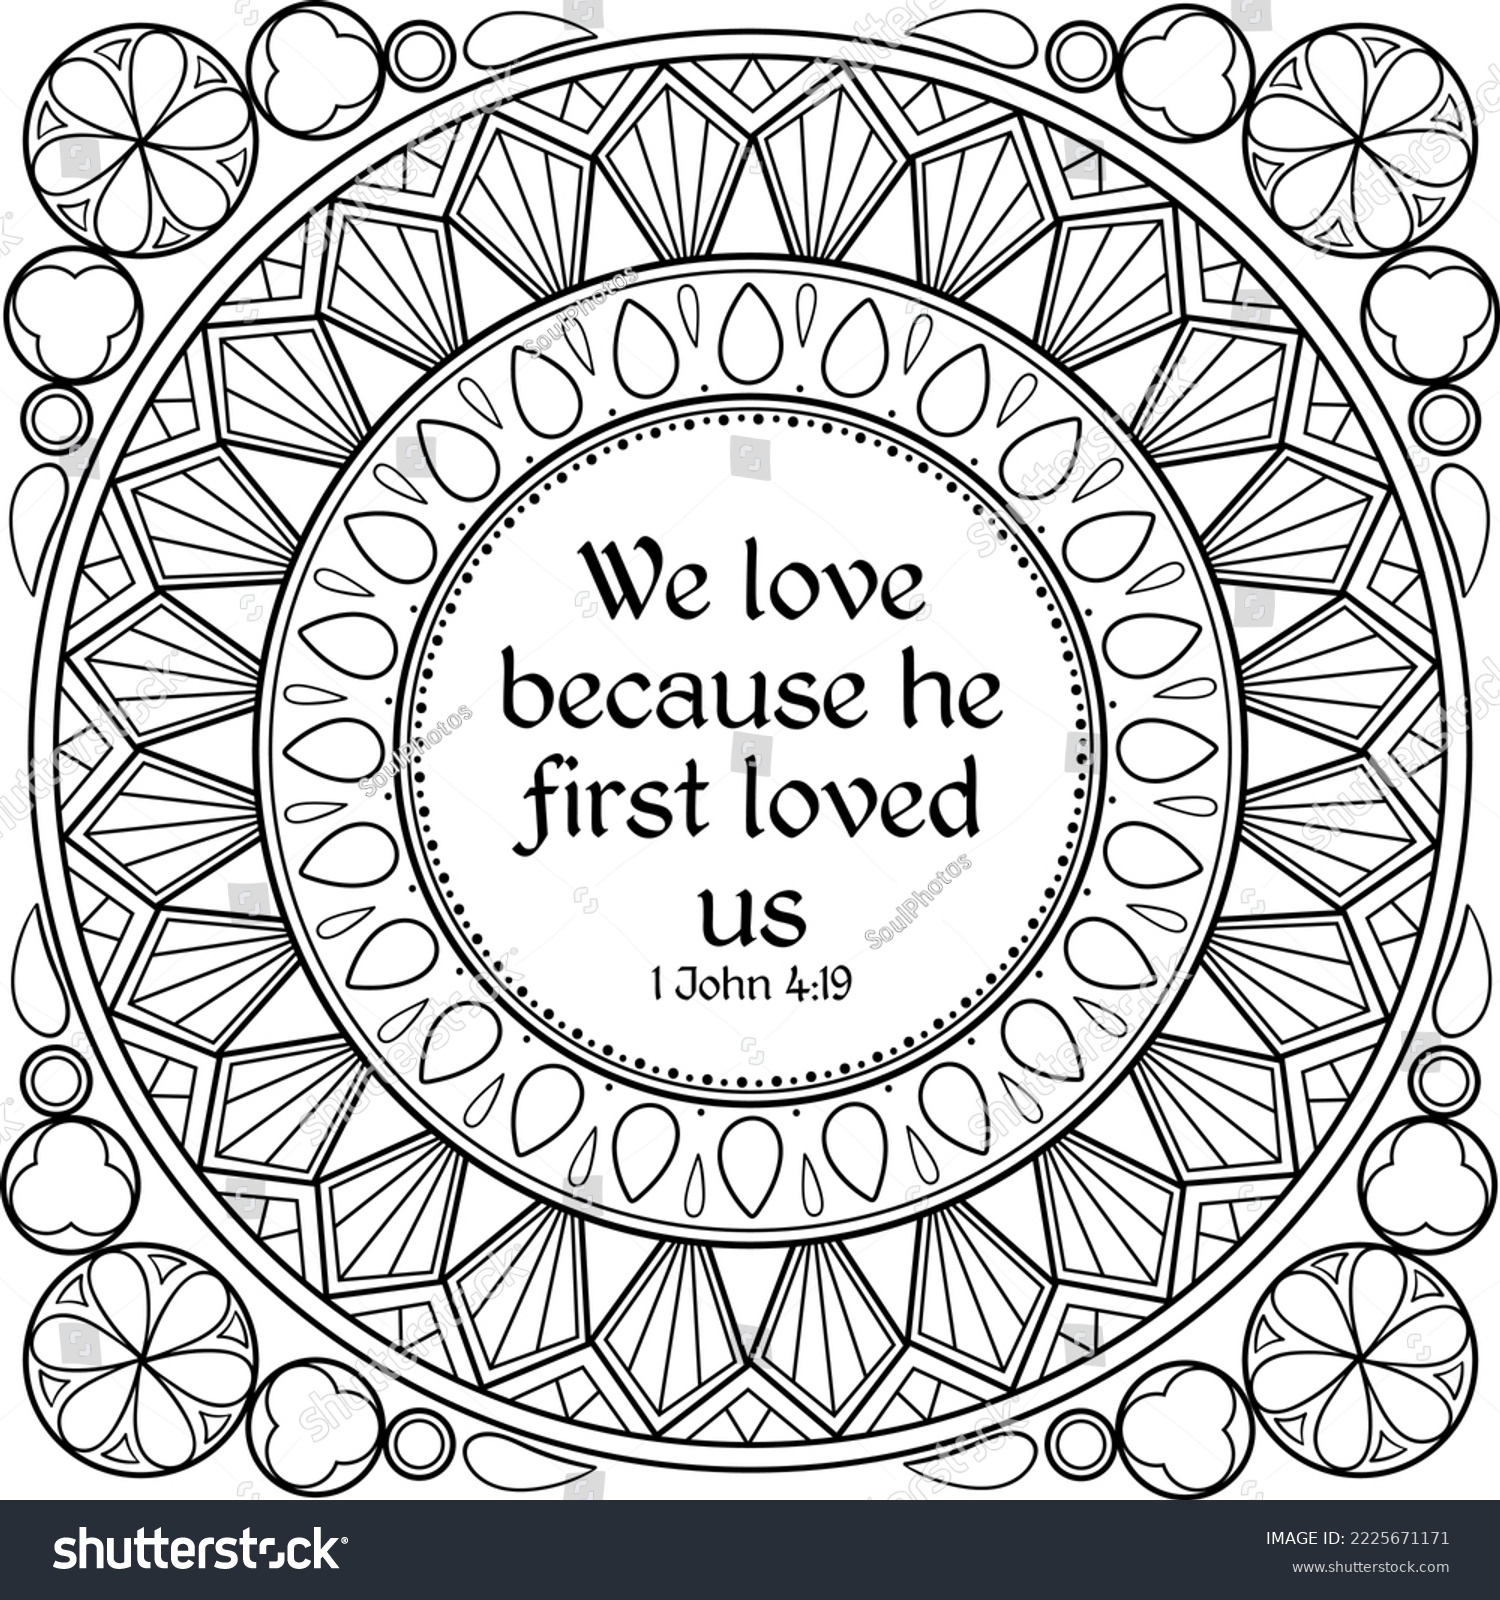 We love because he first loved stock vector royalty free